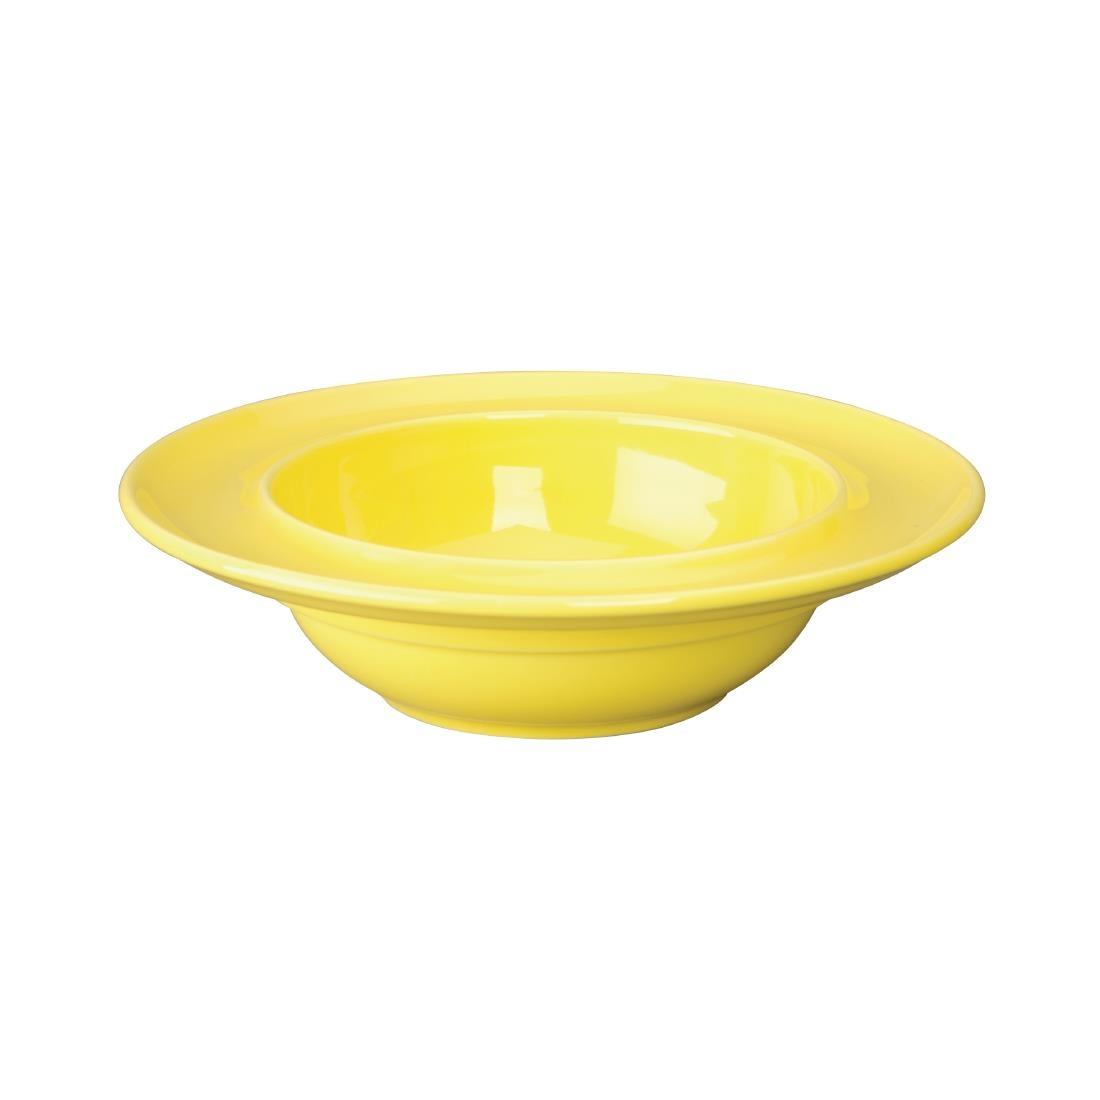 Olympia Heritage Raised Rim Bowls Yellow 205mm (Pack of 4) - DW148  - 2